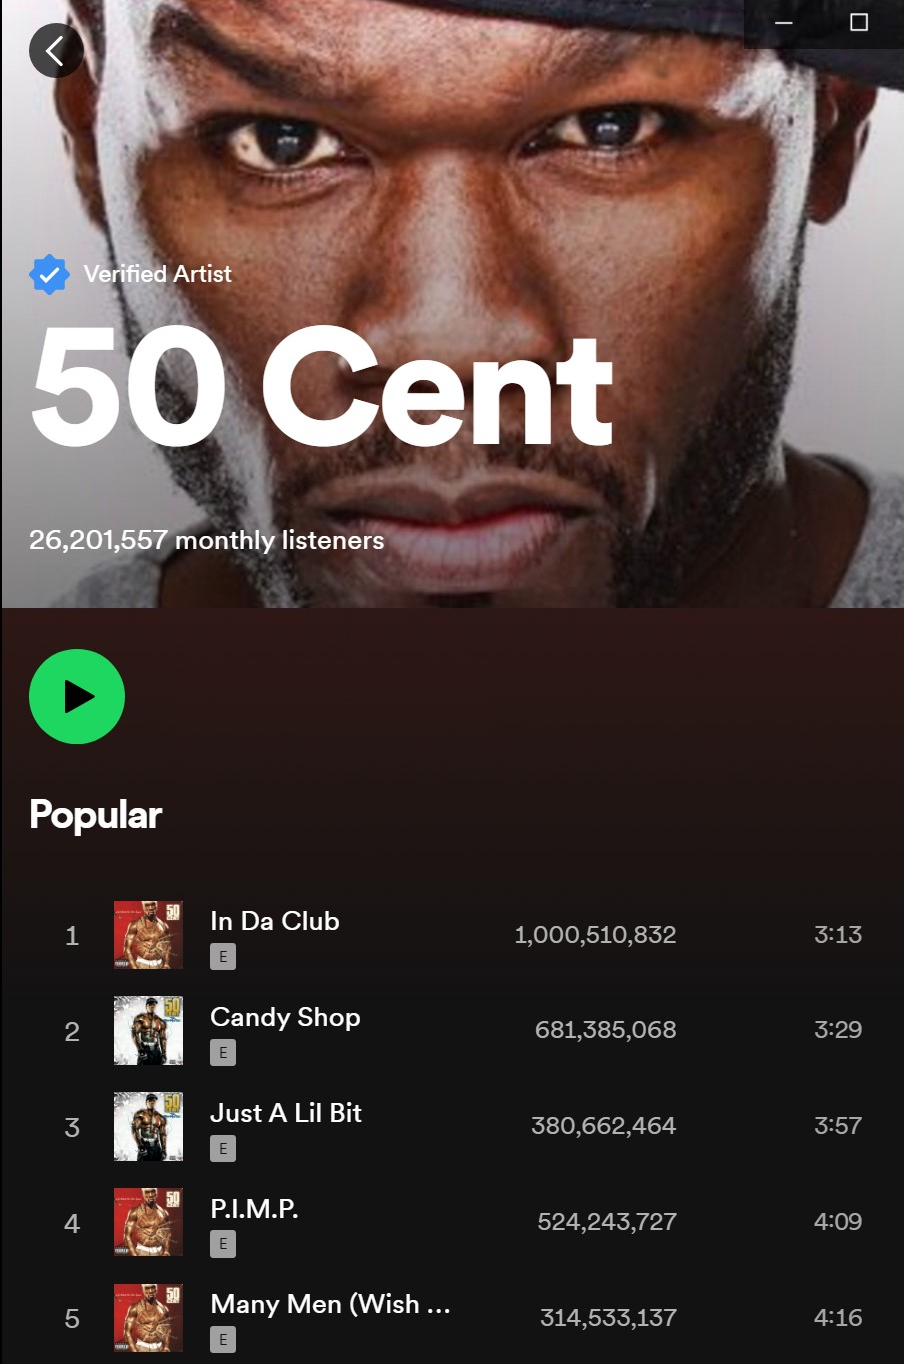 50 Cent — “In Da Club” Surpassed 1 Billion Streams on Spotify   - the biggest and most trusted source of Eminem